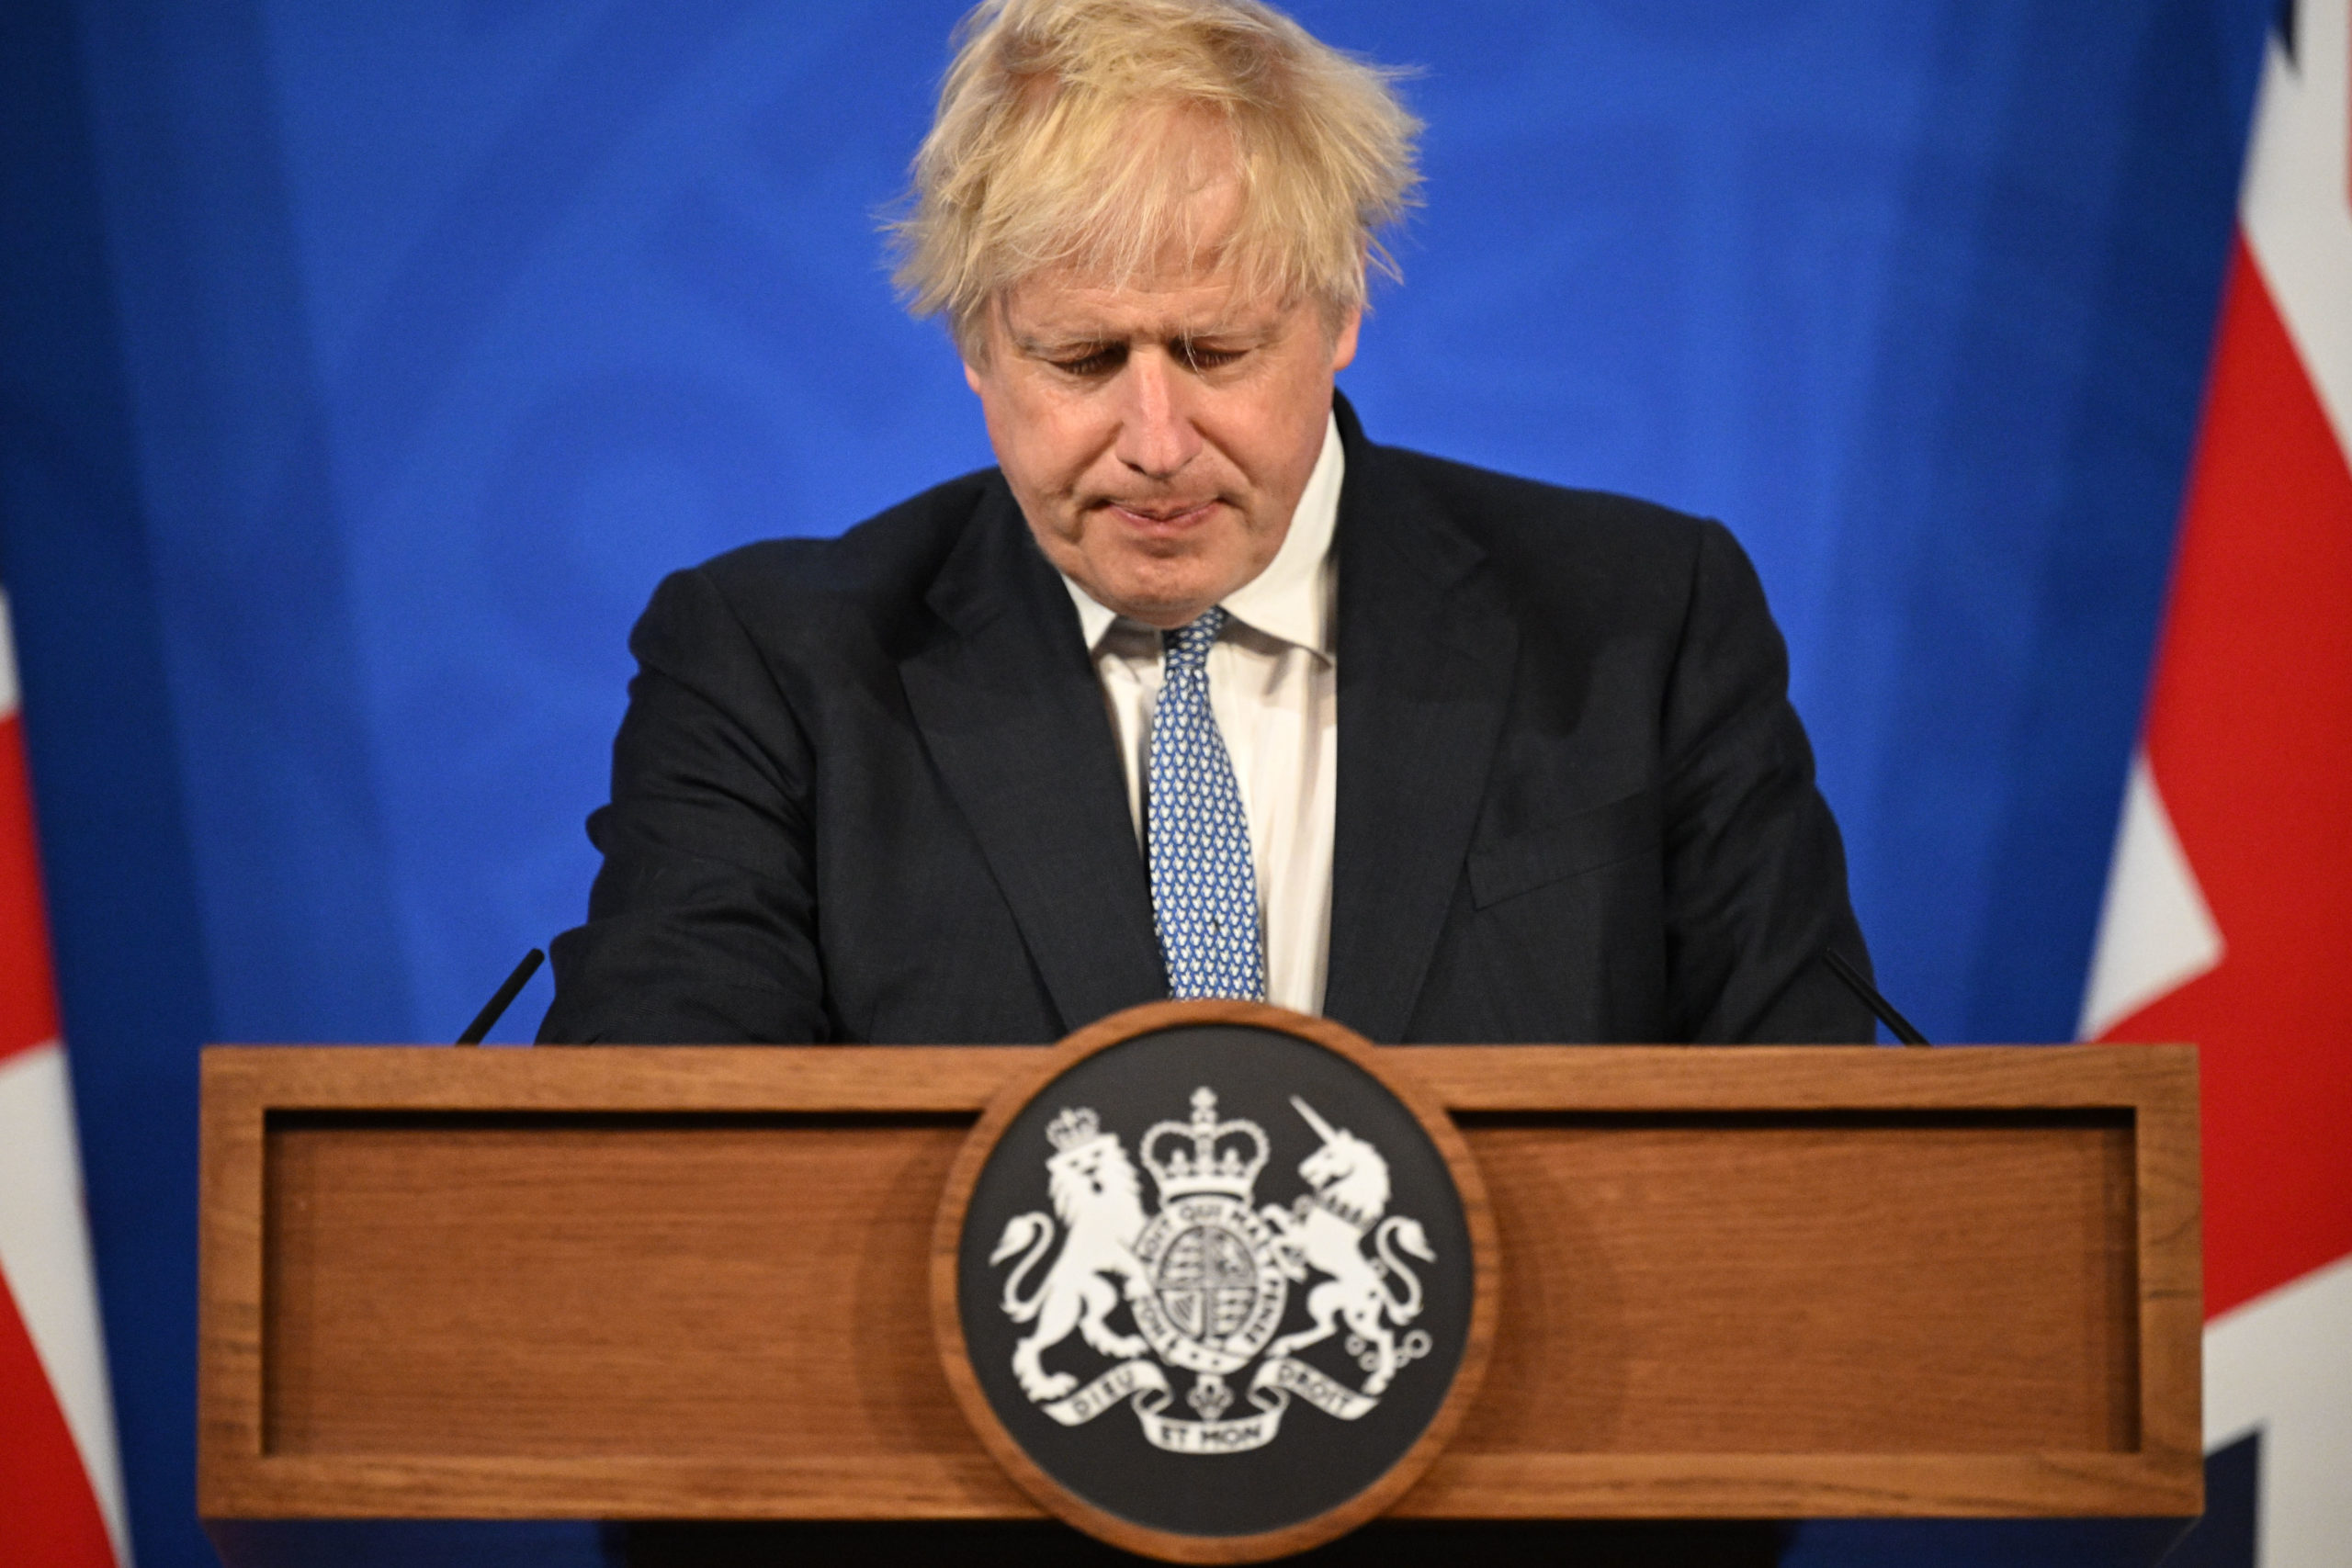 LONDON, ENGLAND - MAY 25: Prime Minister Boris Johnson holds a press conference in response to the publication of the Sue Gray report Into "Partygate" at Downing Street on May 25, 2022 in London, England. (Photo by Leon Neal - WPA Pool /Getty Images)